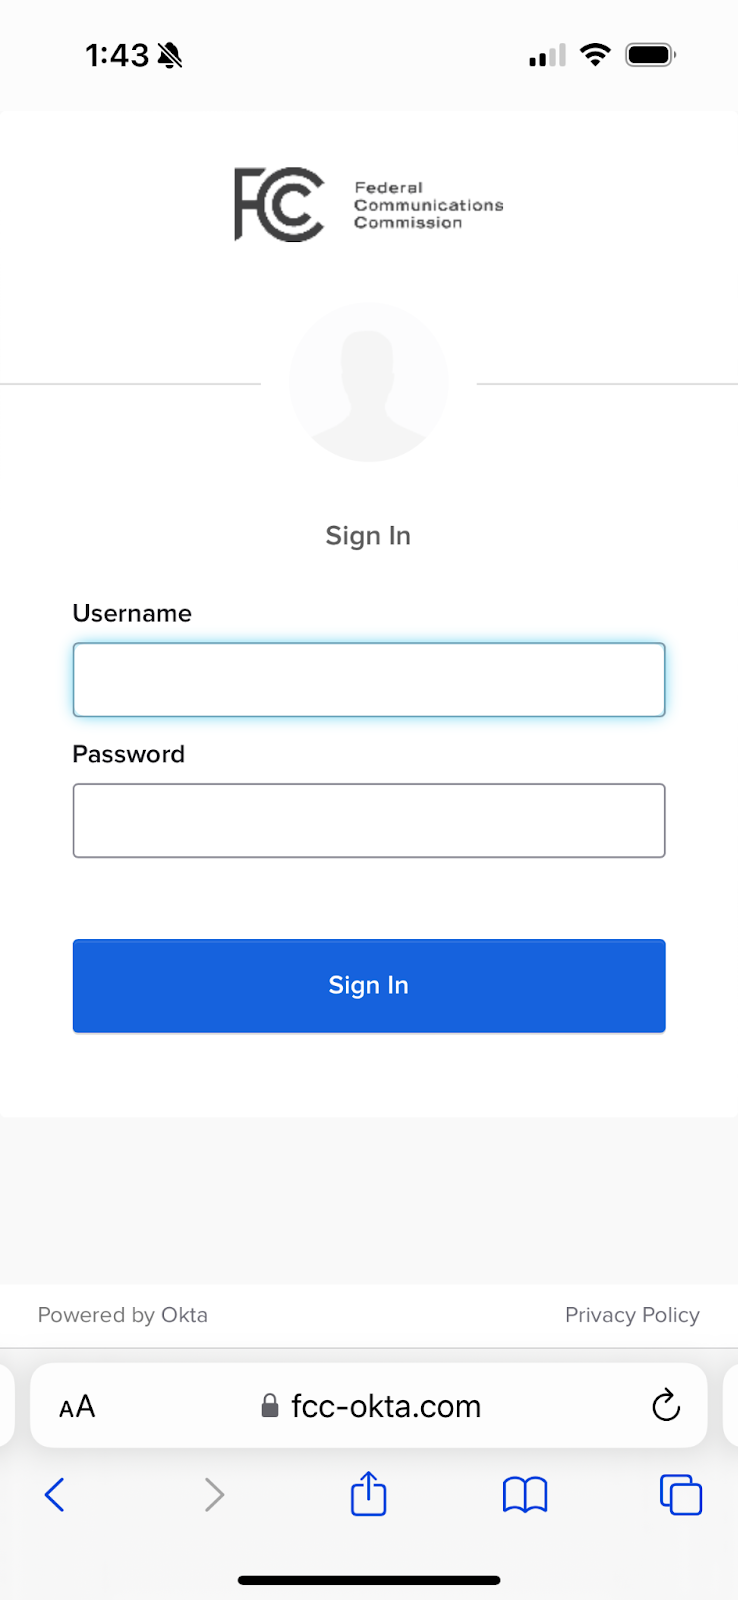 A mobile screenshot of the FCC sign-in page with fields for username and password, powered by Okta.